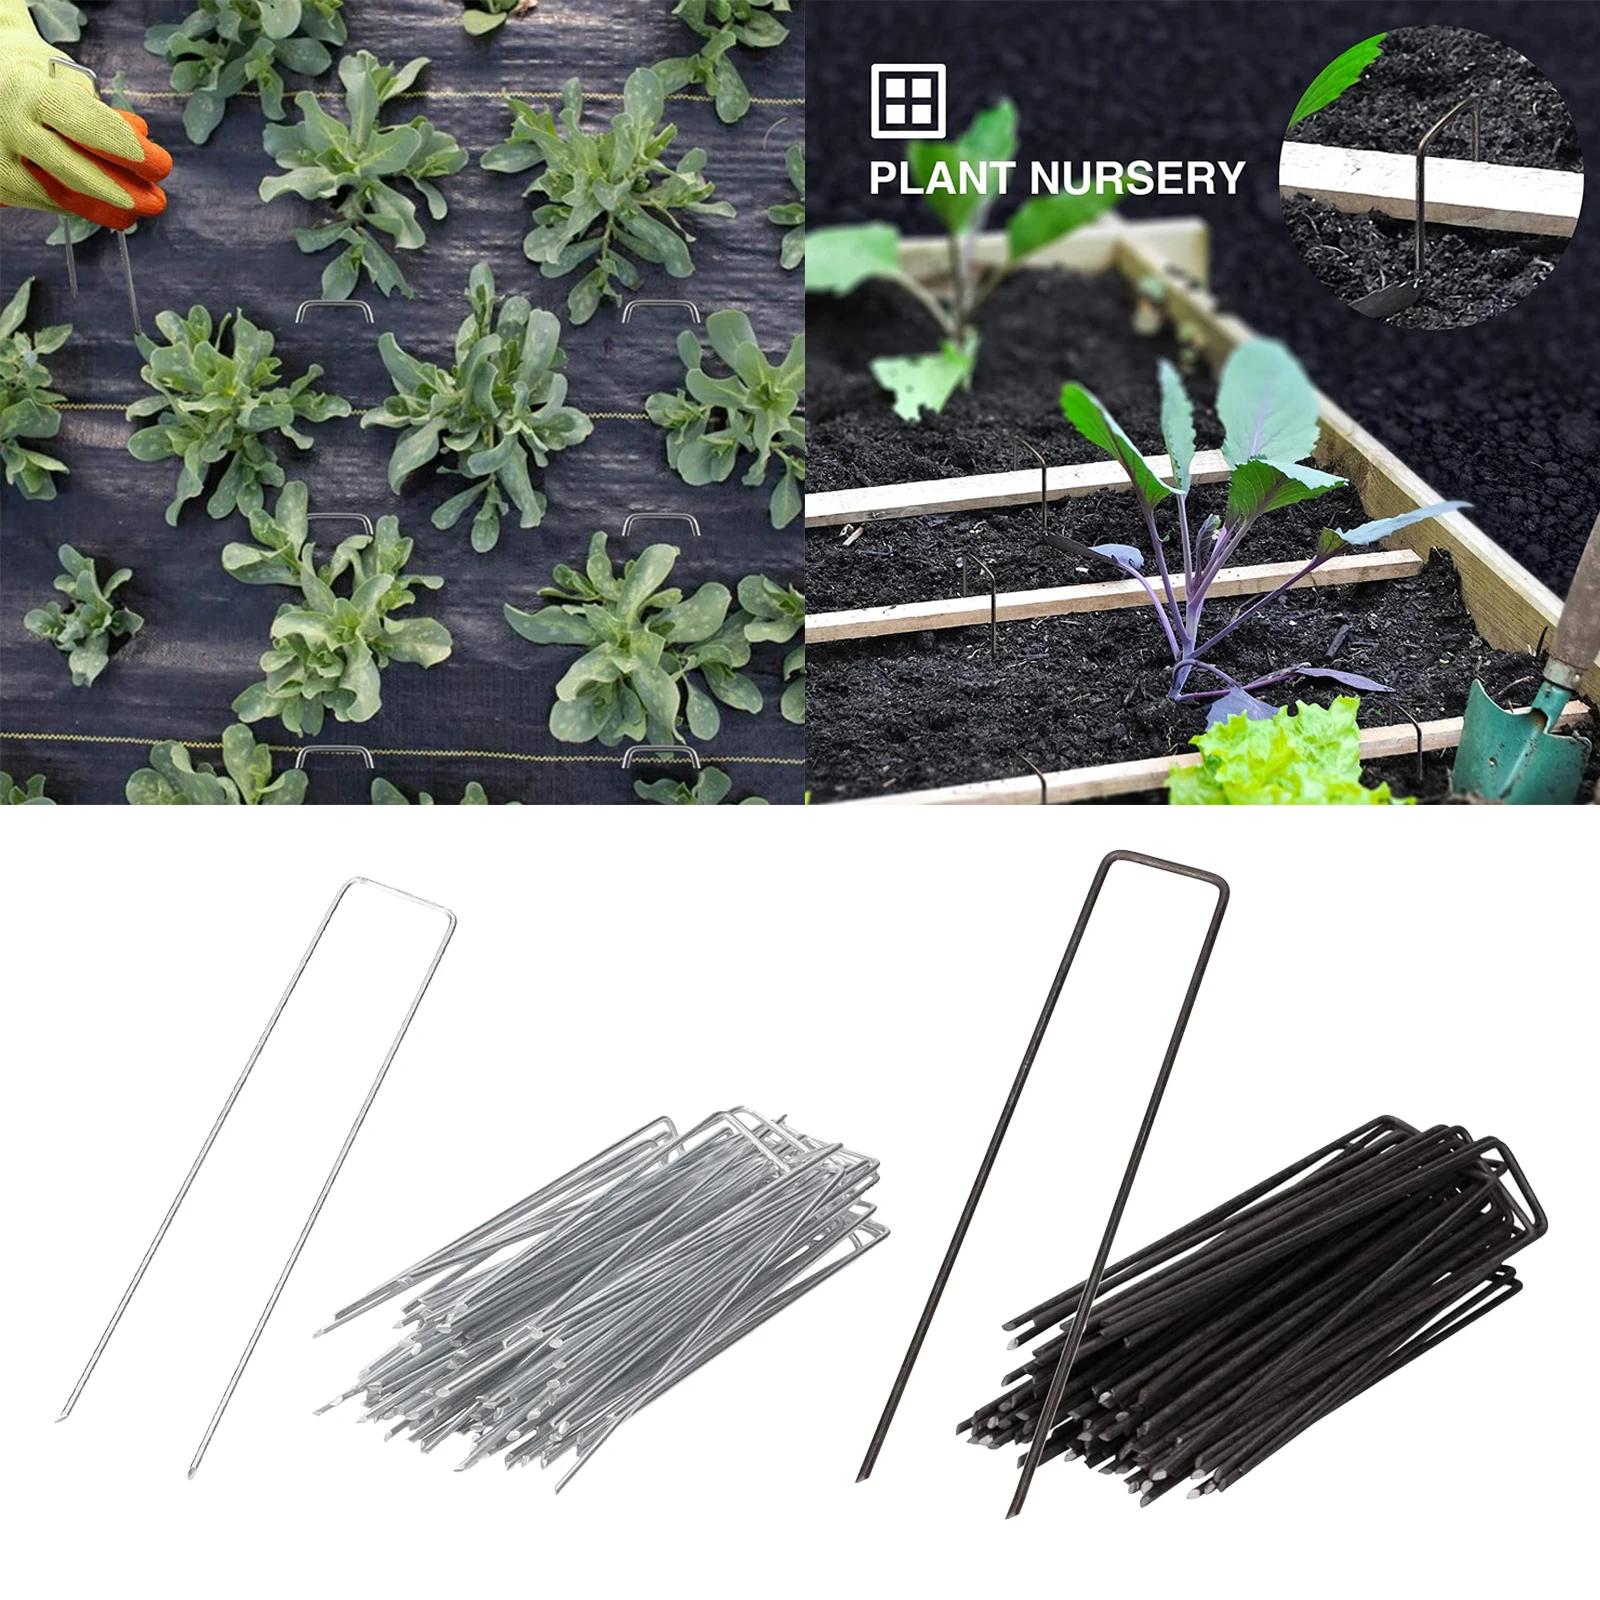 5 Galvanised  Stakes  Turf Staples for Artificial Grass Securing Fences  